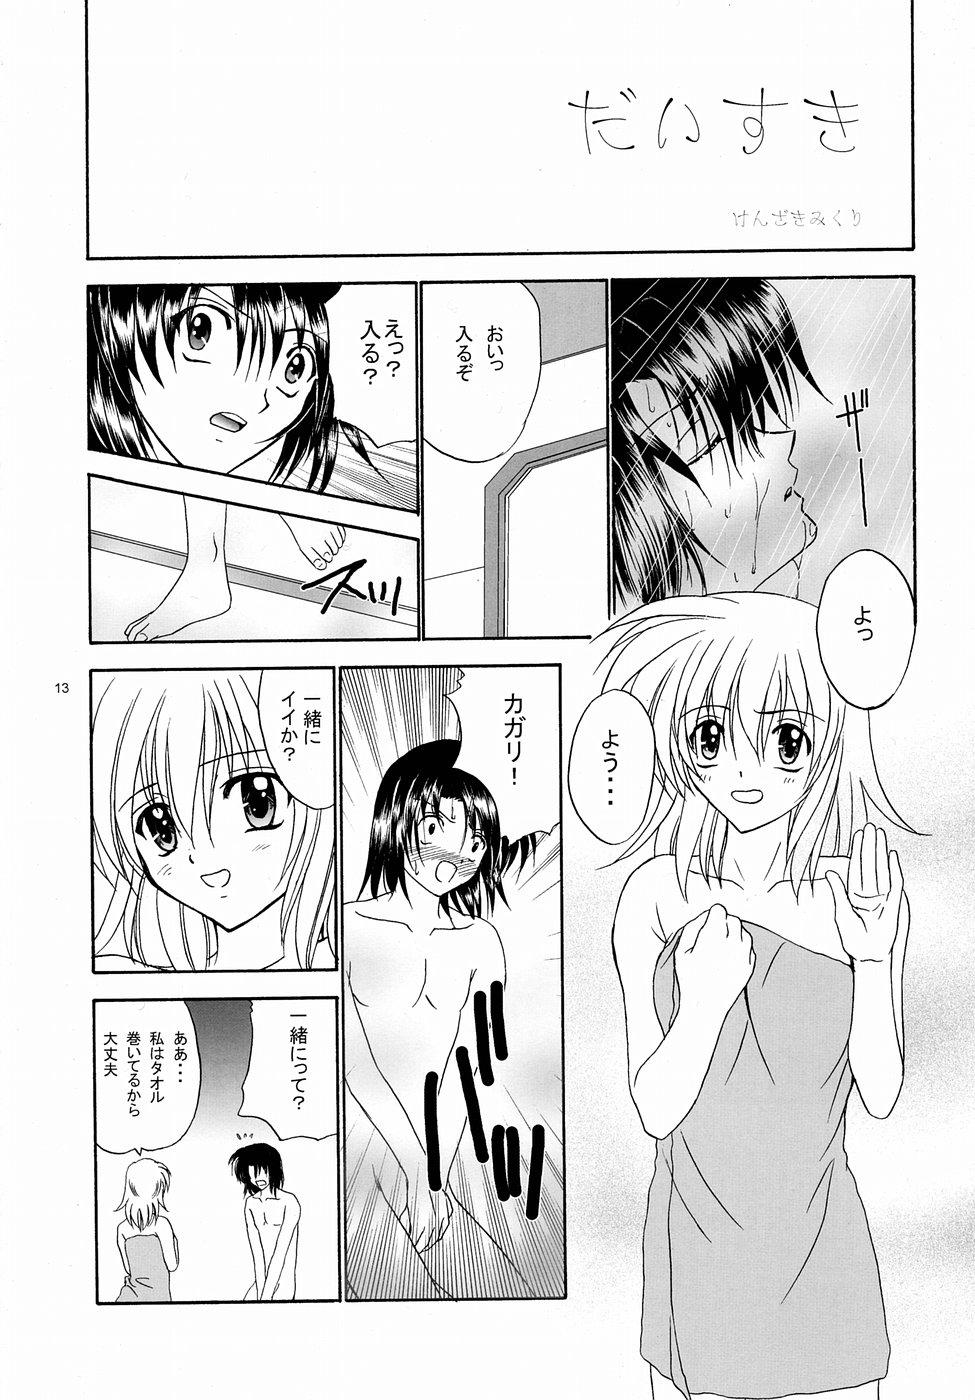 Leaked S.O.S - Gundam seed Pounding - Page 12